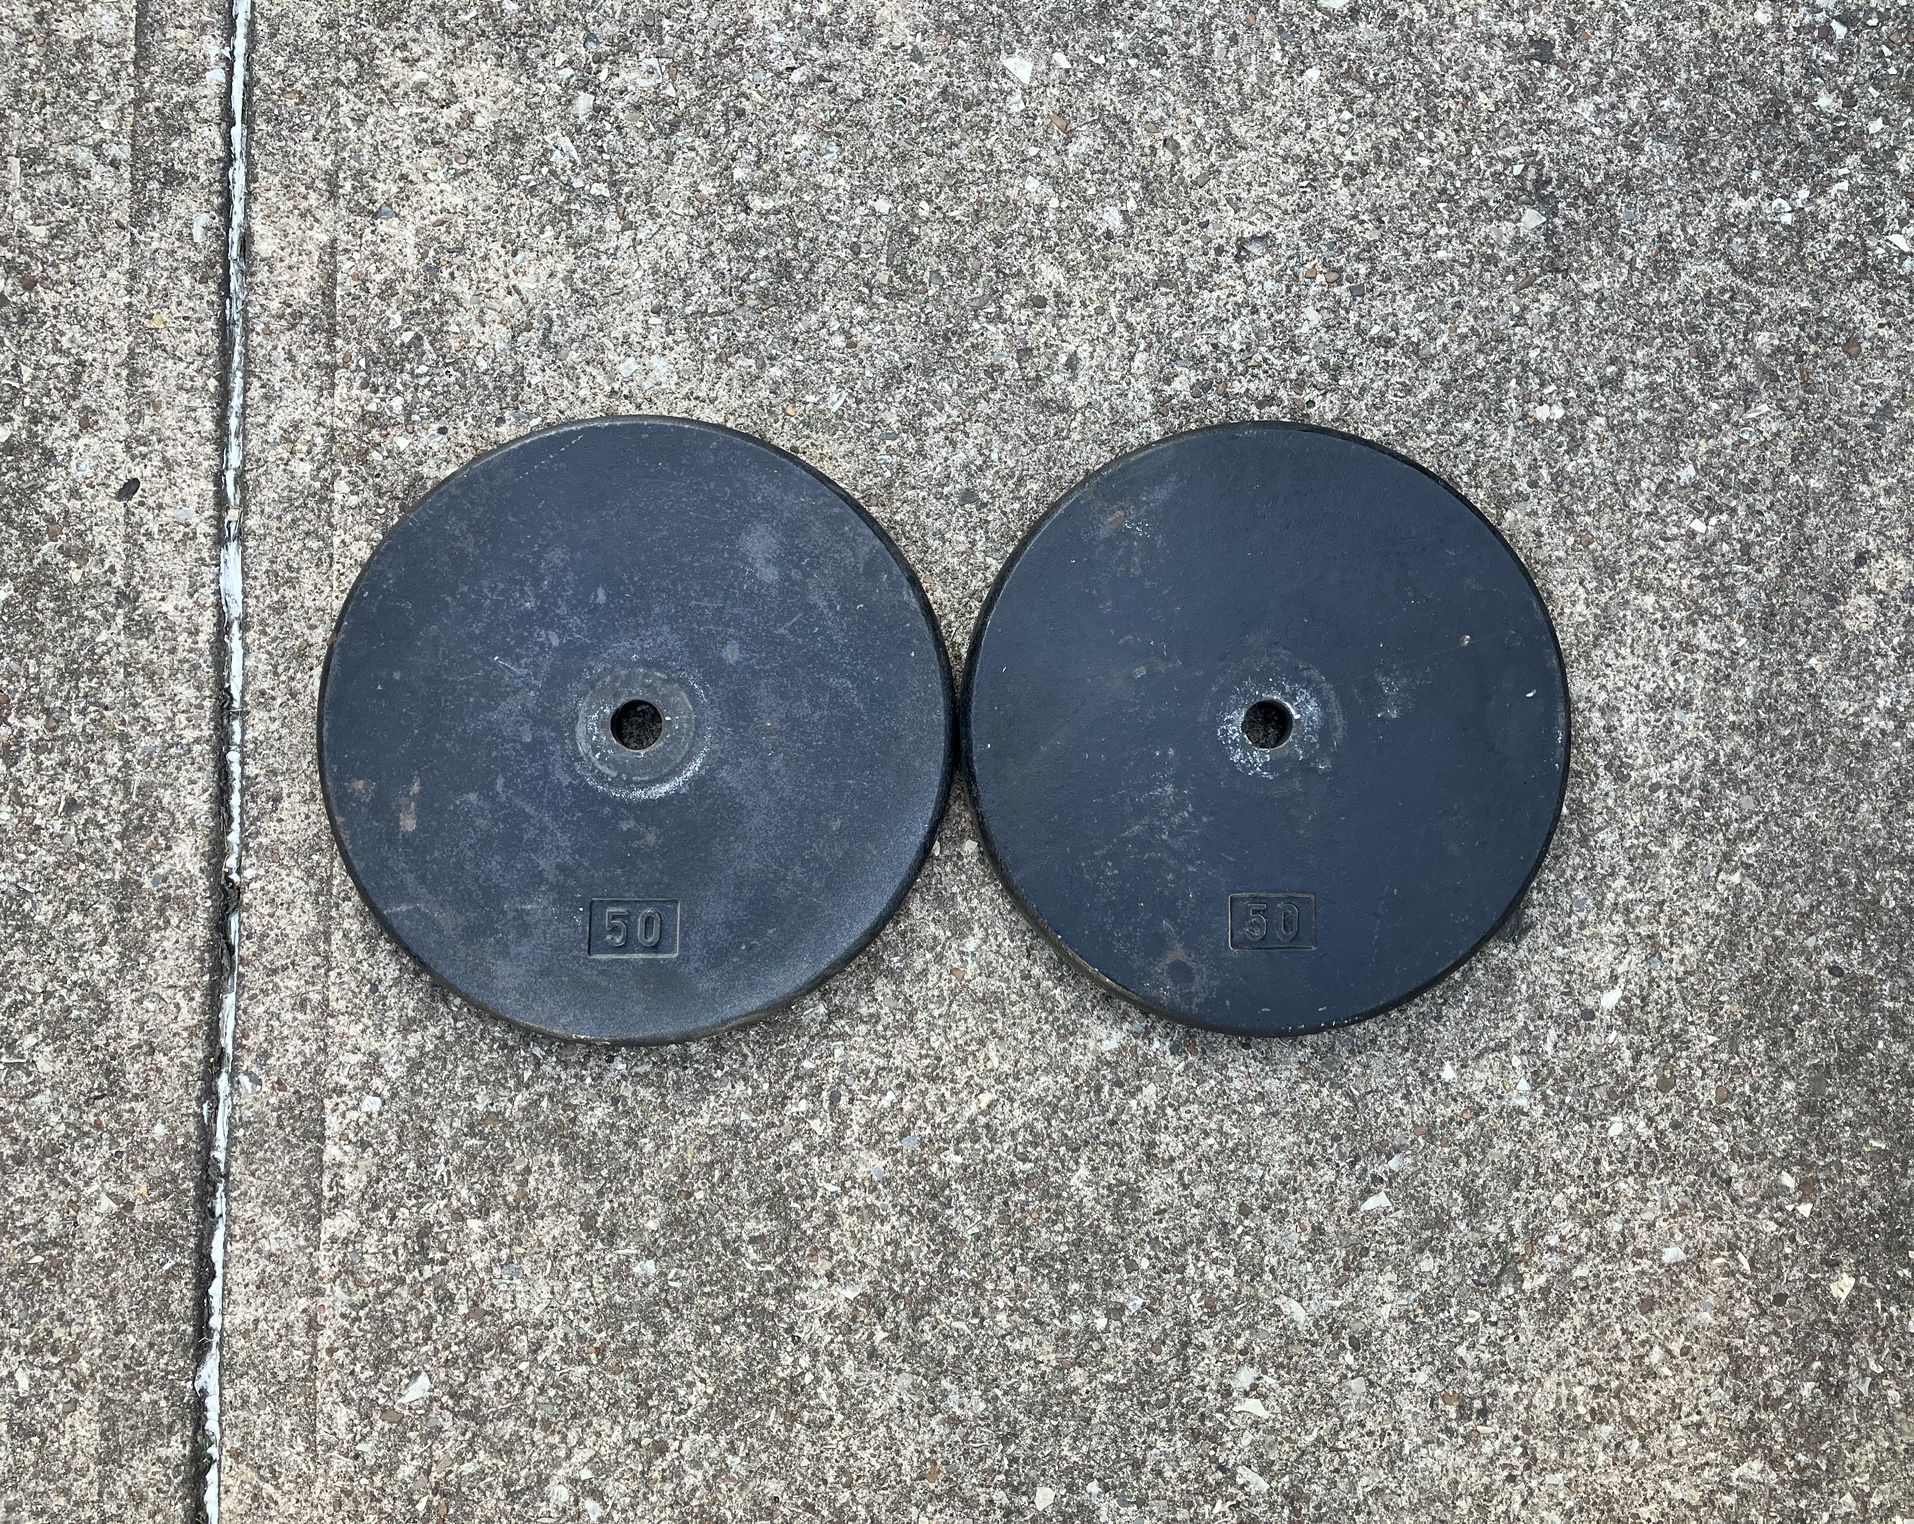 50 lb Standard 1” weight plate set 100 lbs total weights 50lb 50lbs Cast Iron plates Flat Pancake style 